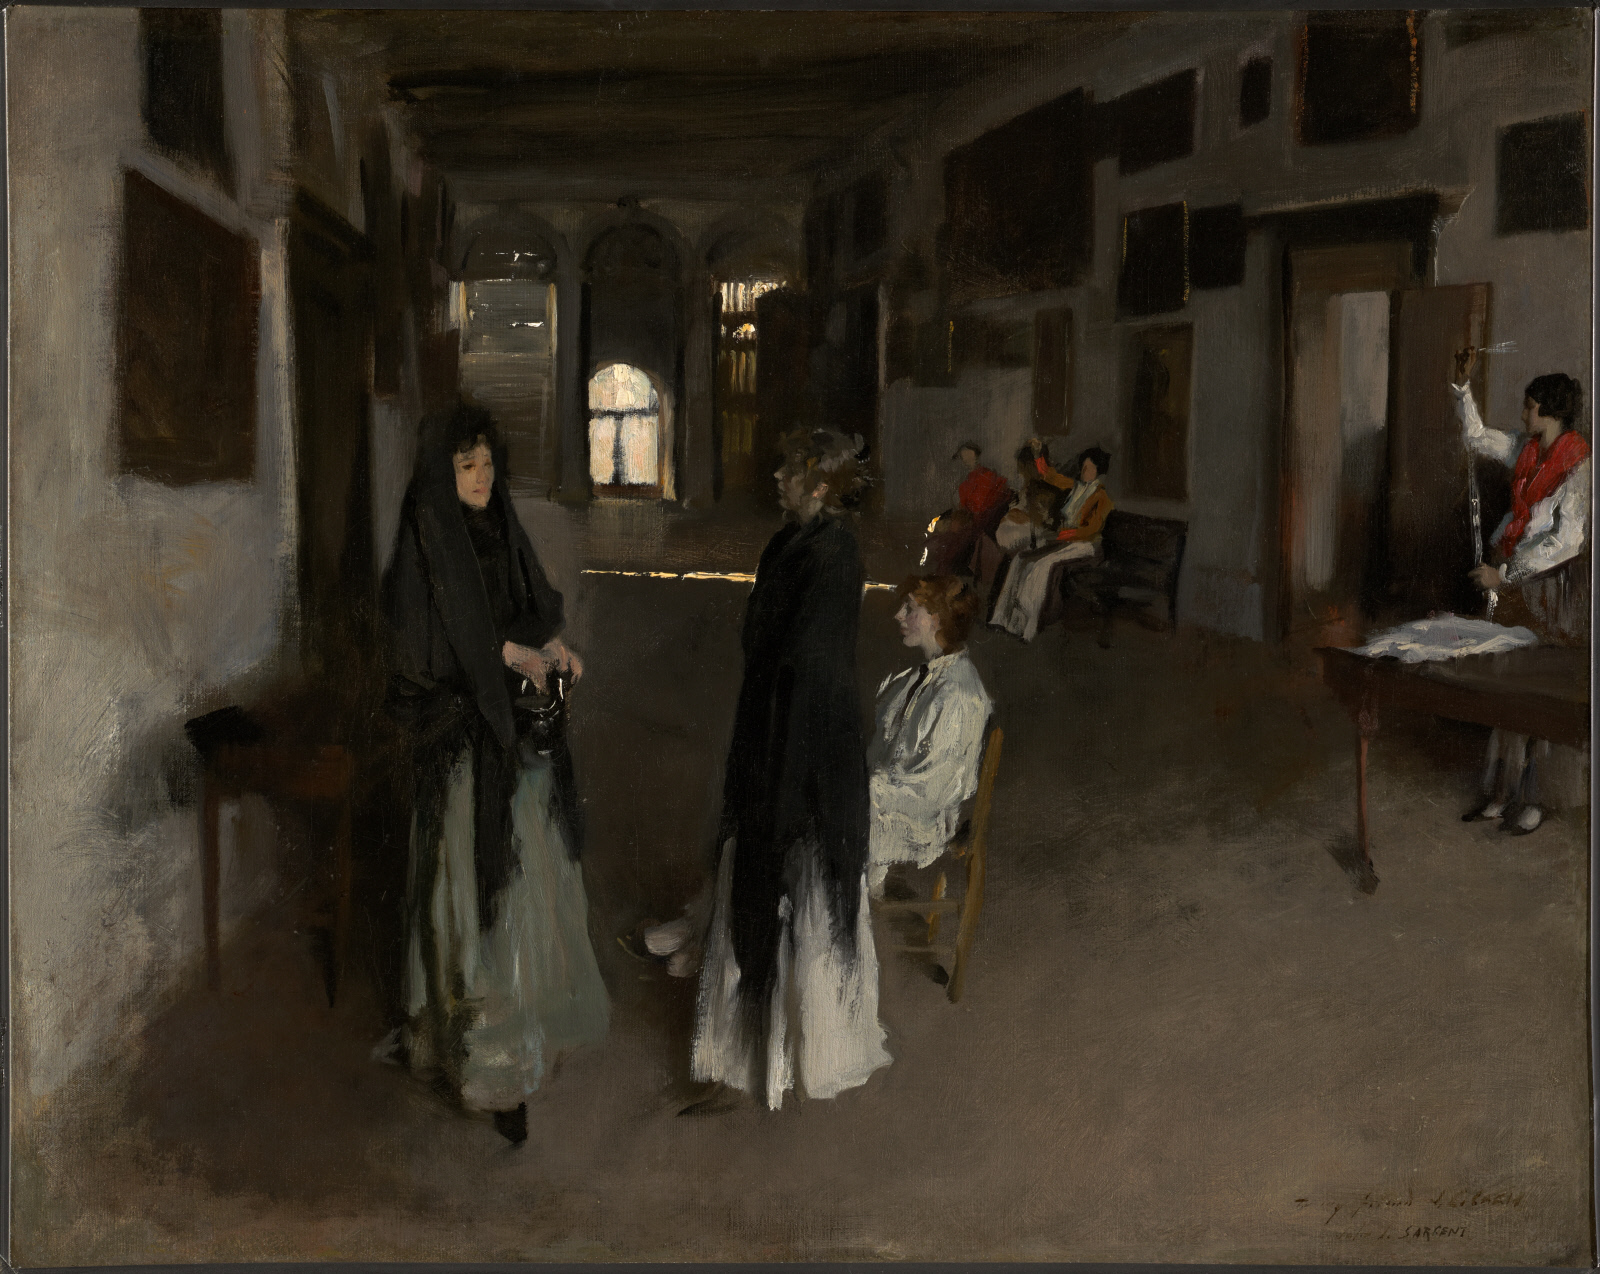 Sargent, Whistler, and Americans in Venice